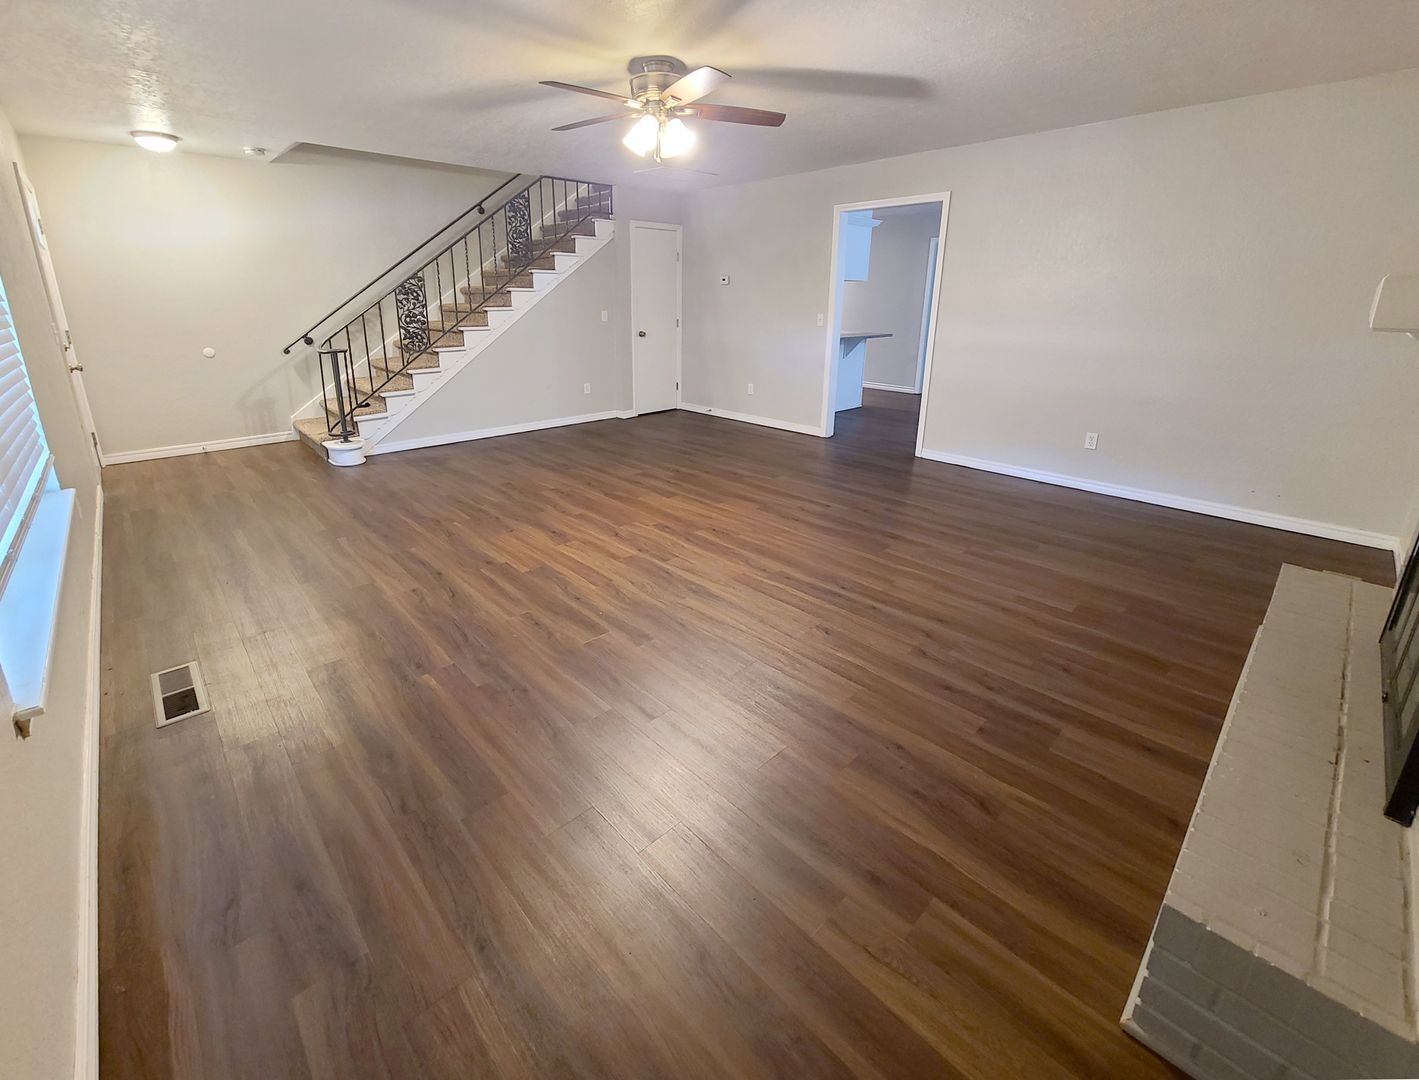 Spacious Duplex in Heart of NW OKC